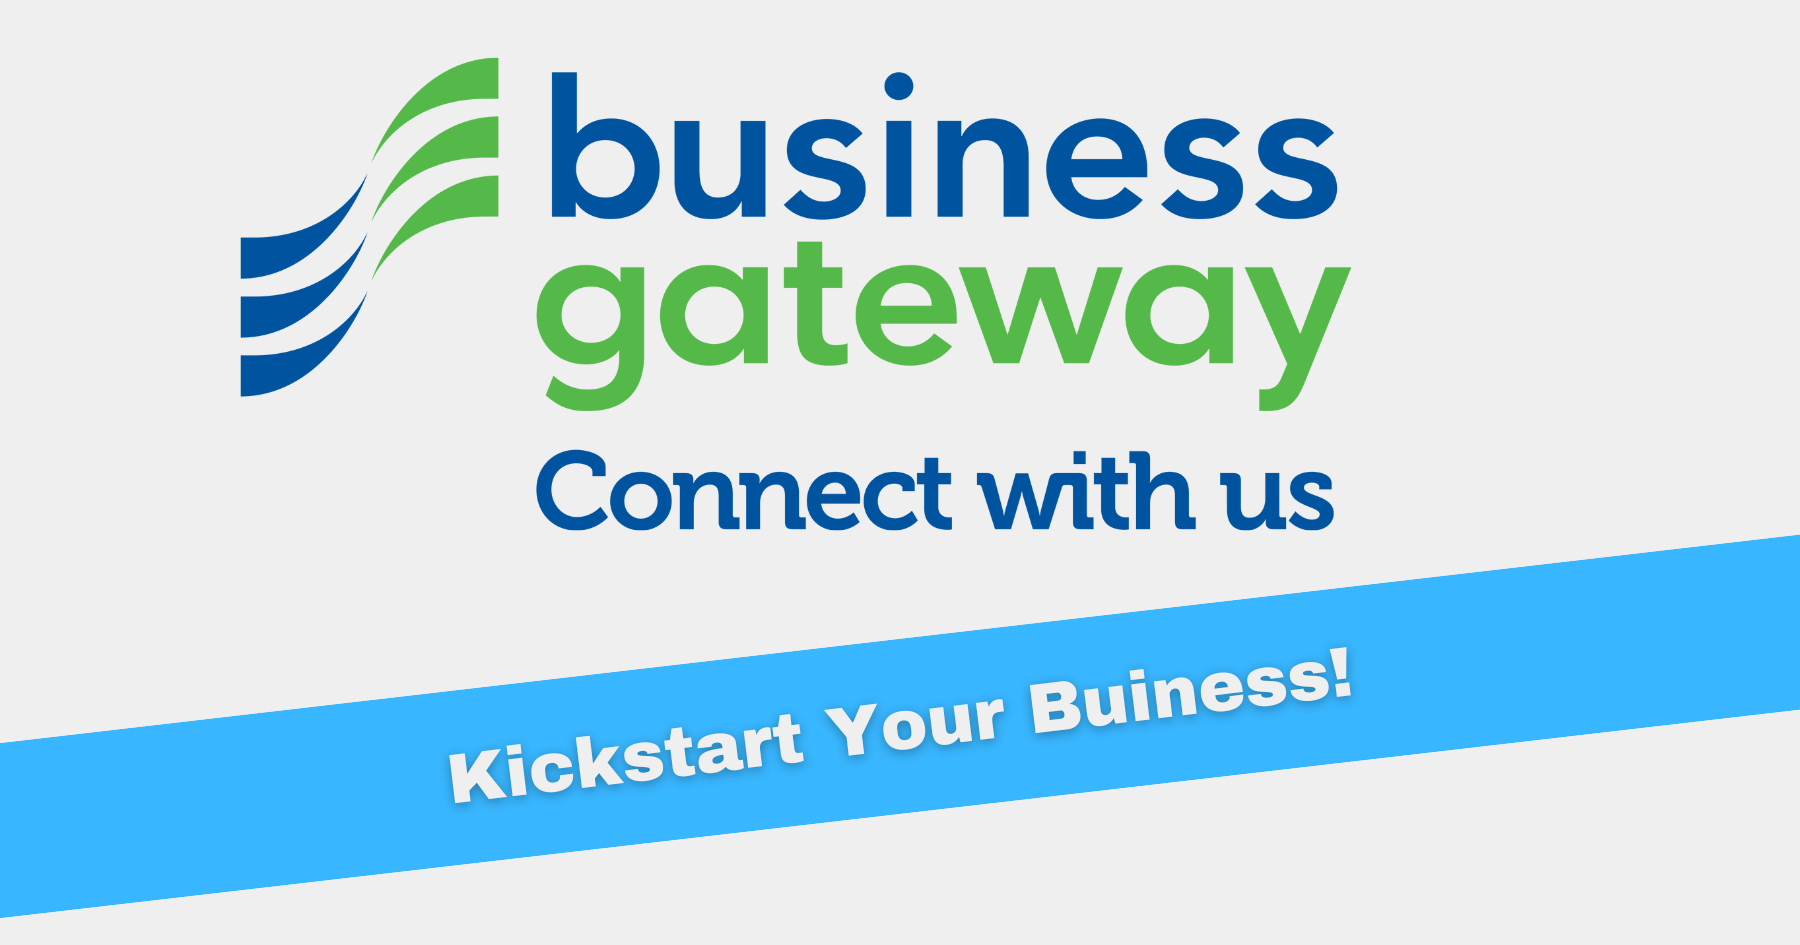 Kickstart Your Business with the Business Gateway